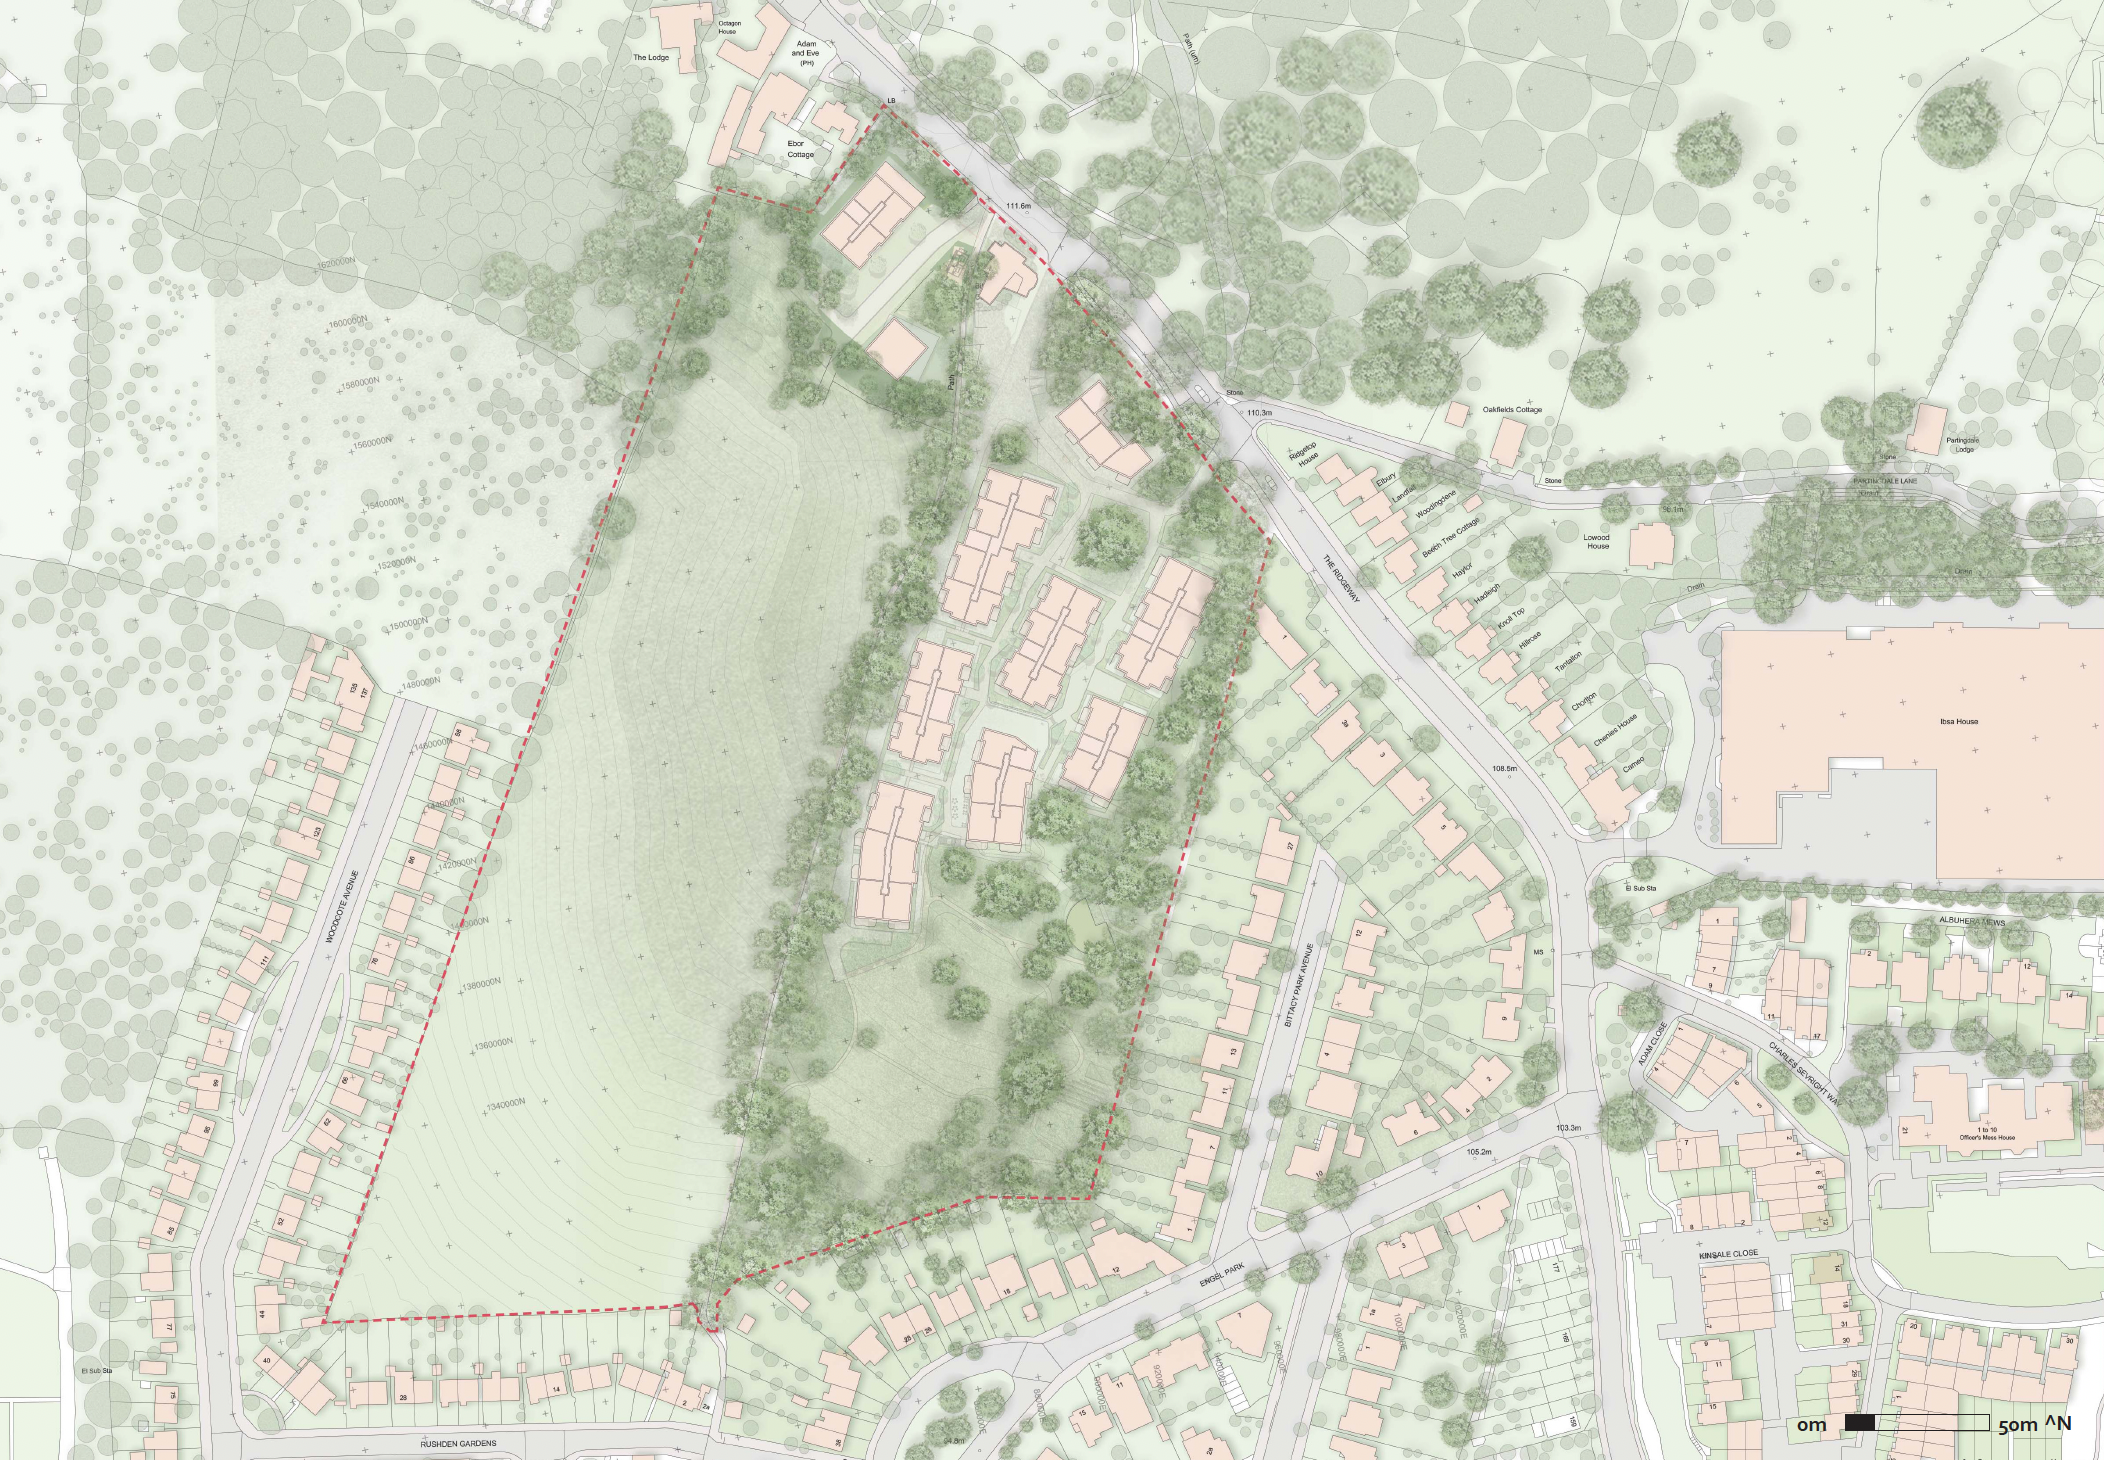 The proposed masterplan, with our site outlined in red.